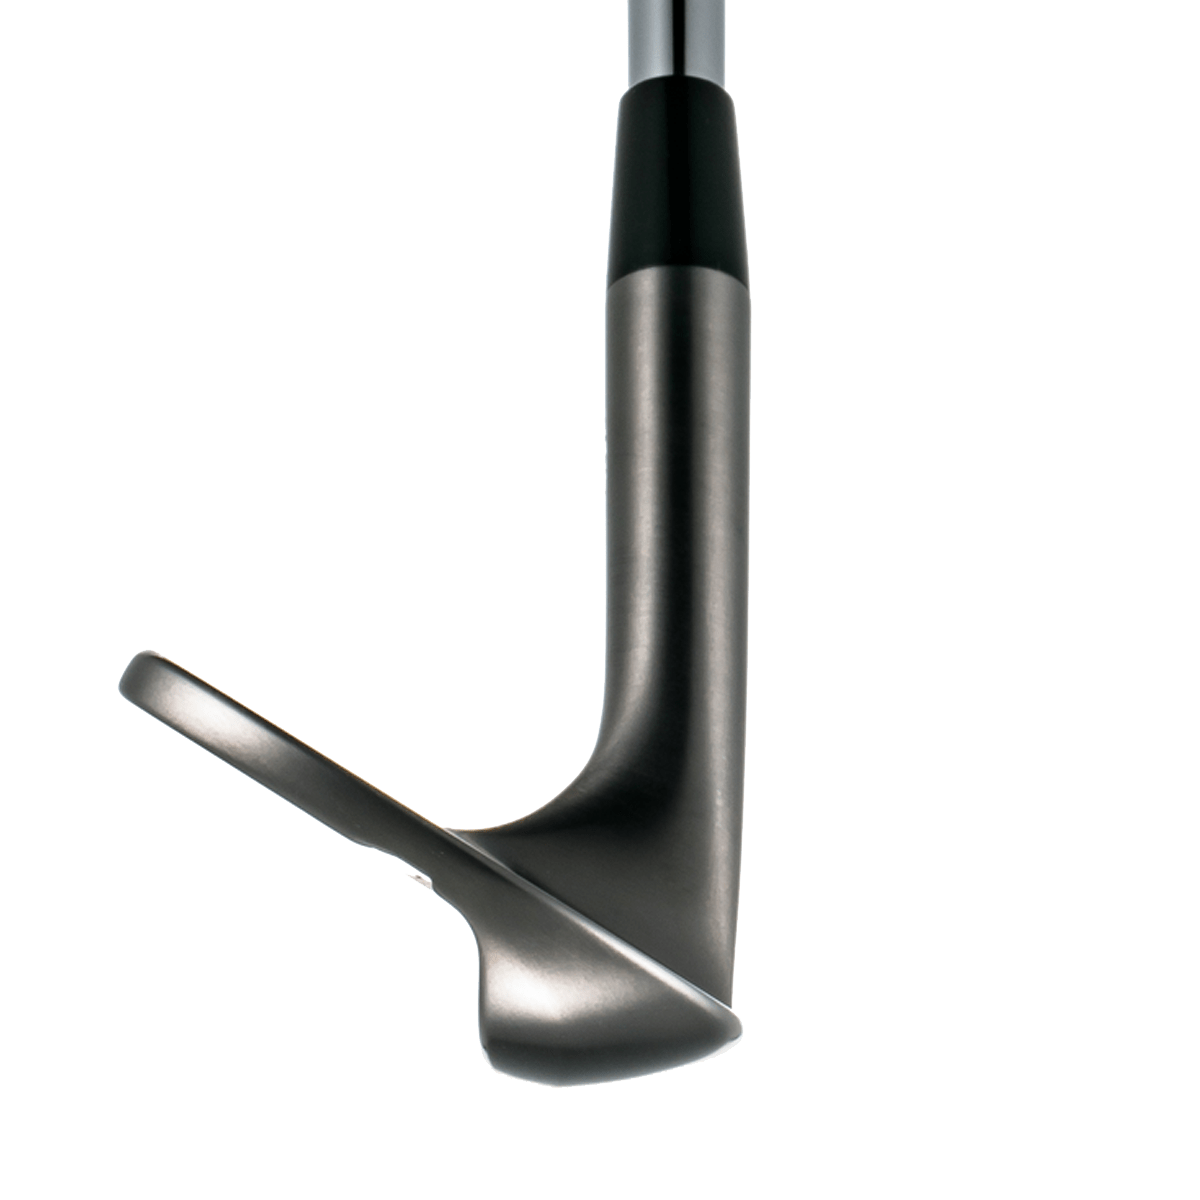 PROTOCONCEPT Golf, Forged Wedge - 29